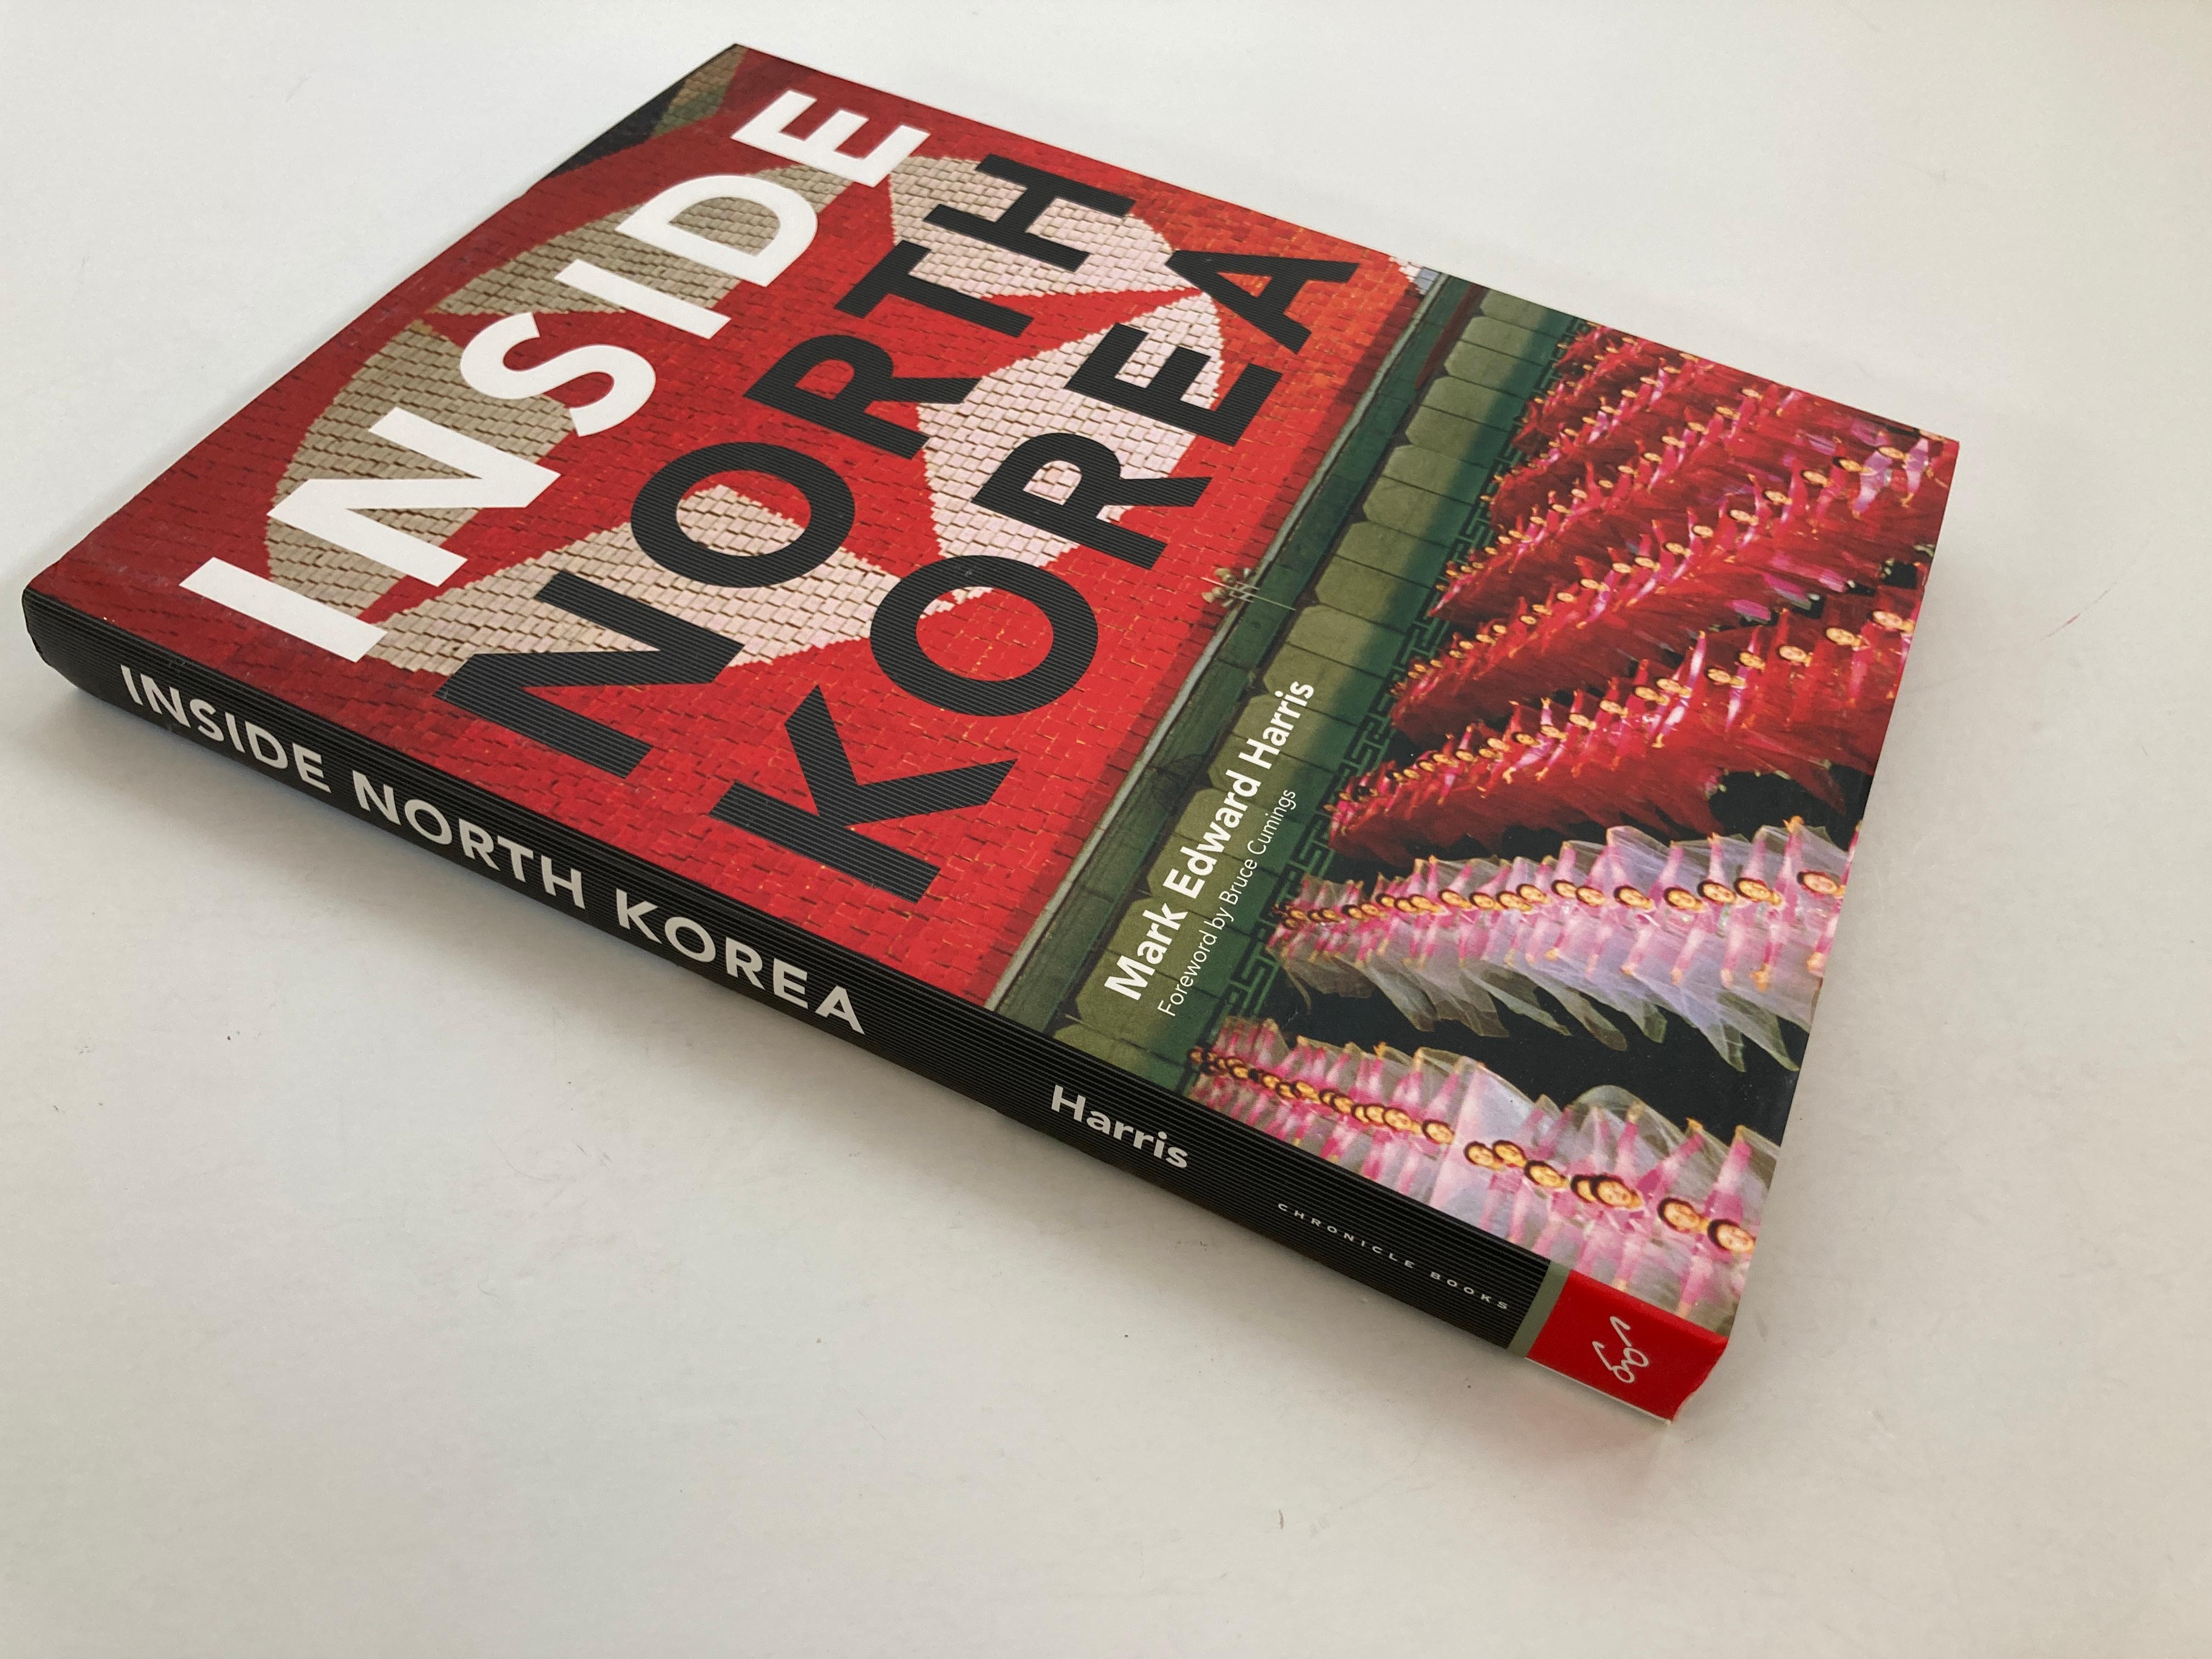 Inside North Korea
Harris, Mark Edward; Cumings, Bruce
This is a beautiful large library or coffee table book
Title: Inside North Korea
Publisher: Chronicle Books
Publication Date: 2007
Binding: Hardcover
Book Condition: As New
About the